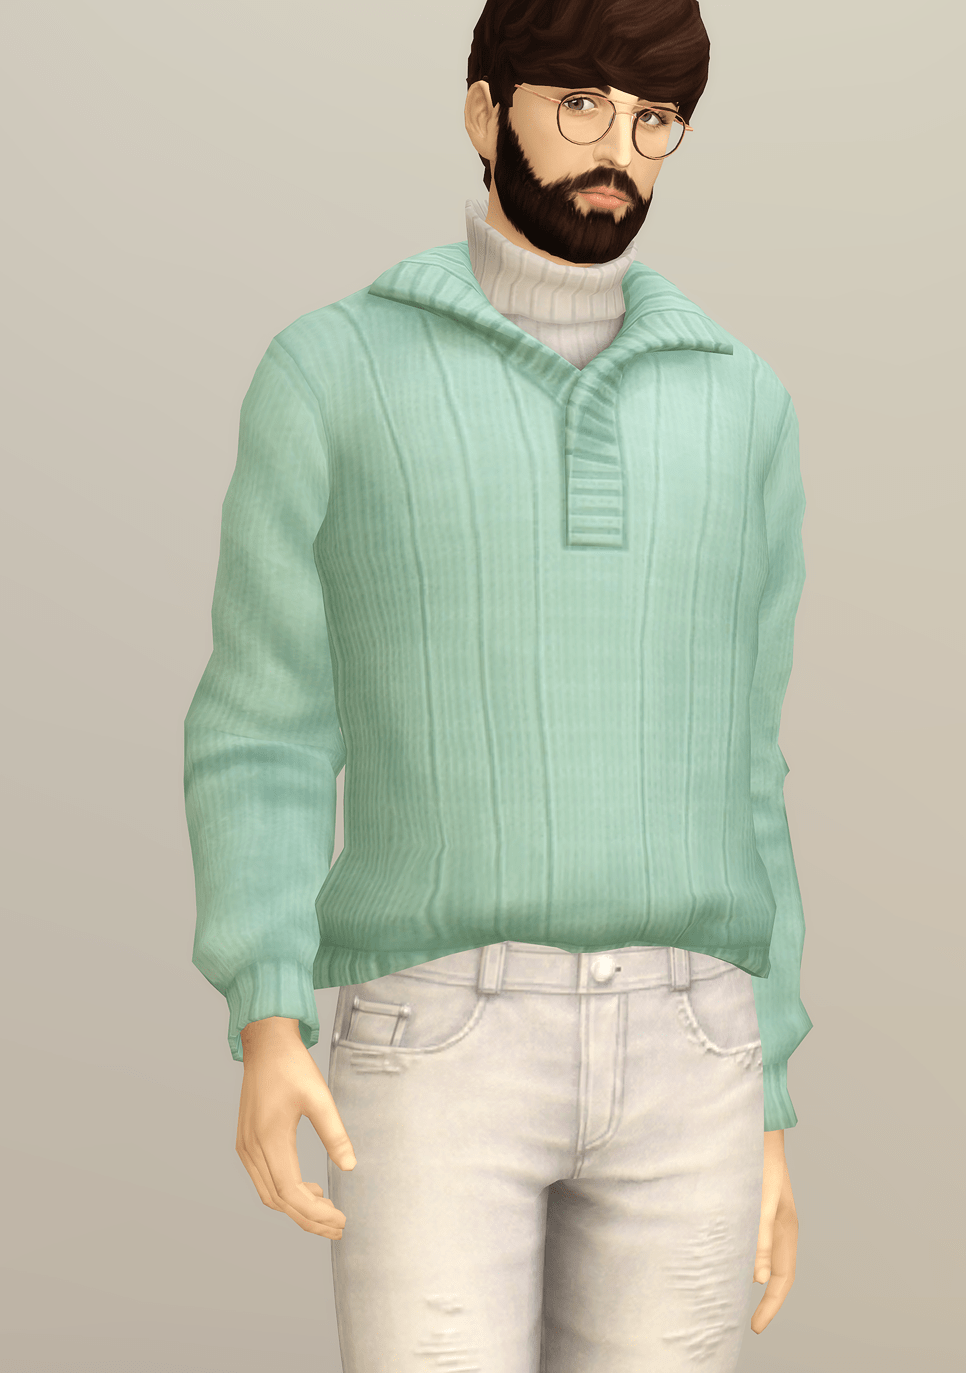 Stunning Mint CC For TS4 Wardrobe and Interior — SNOOTYSIMS